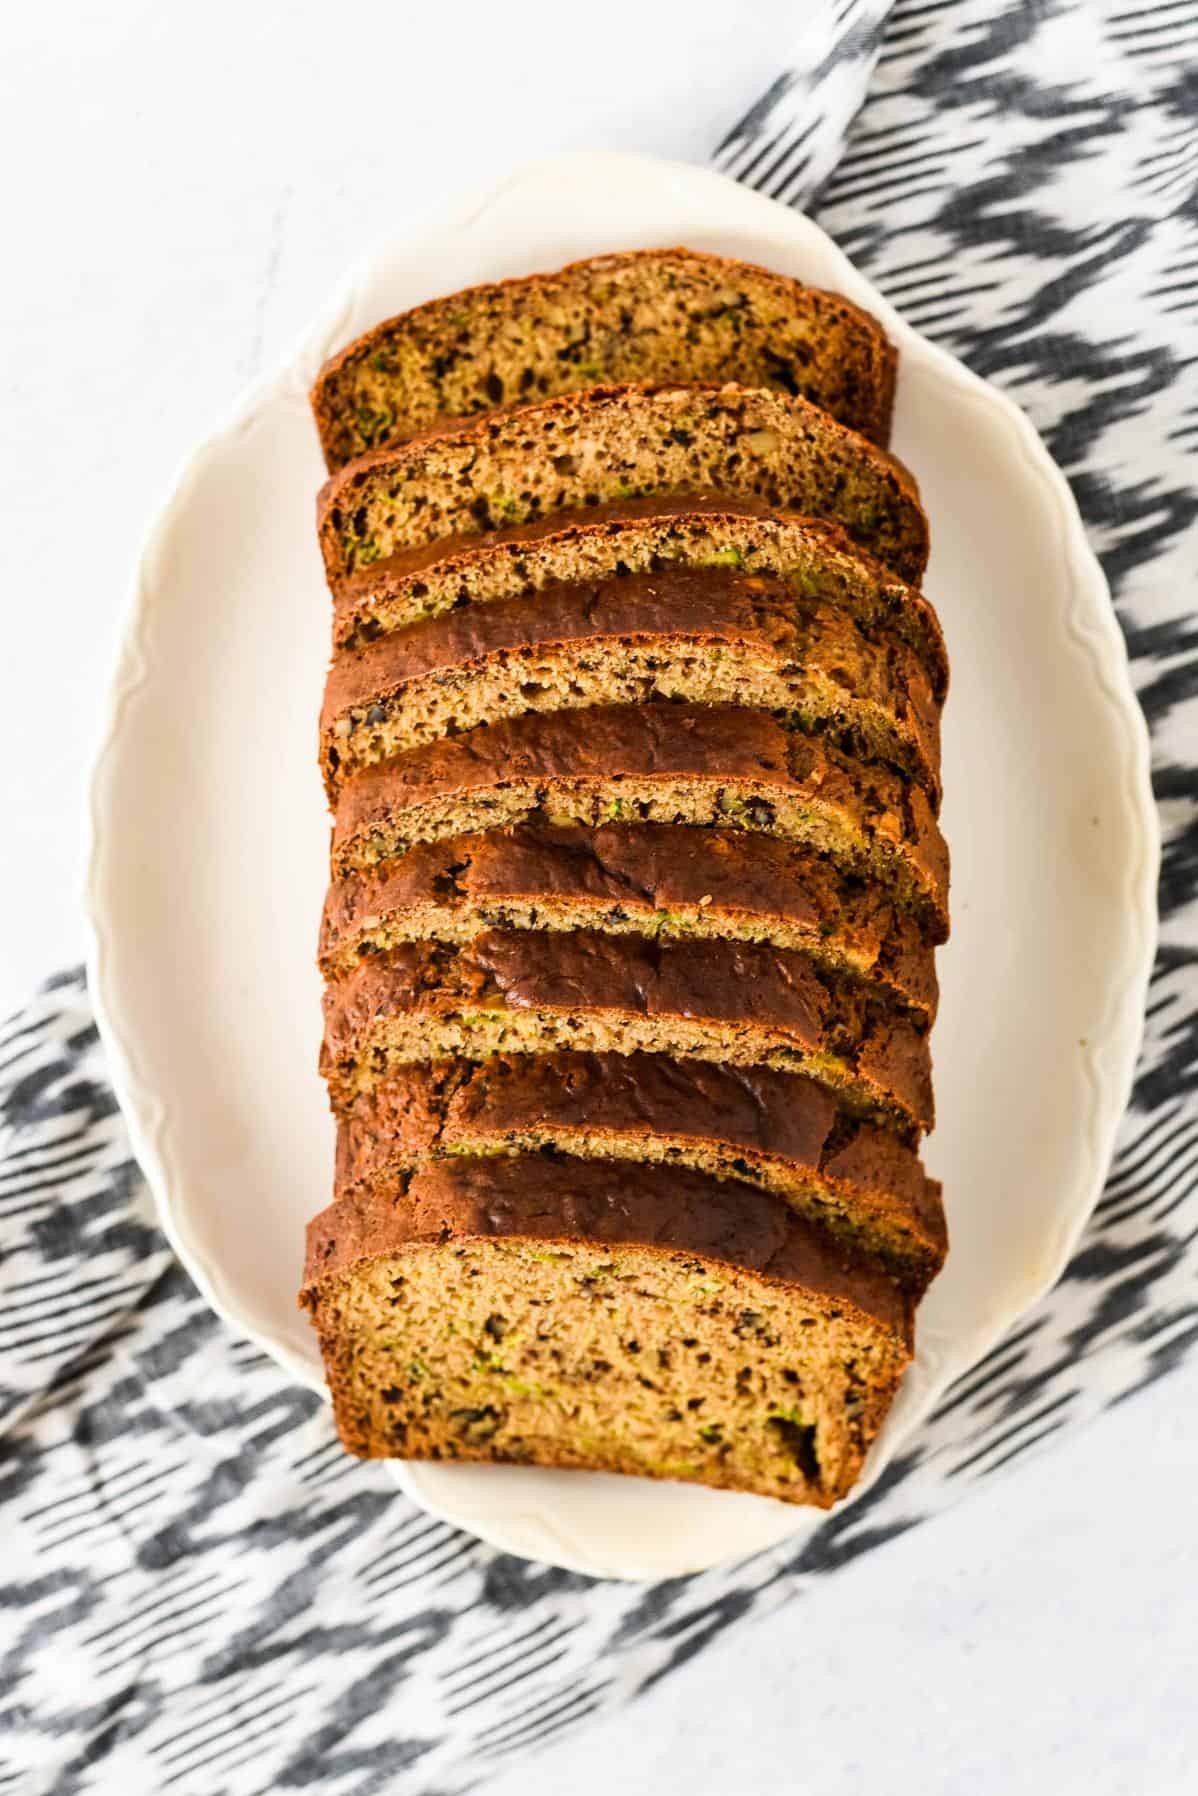  Not a fan of zucchini? This bread might just change your mind.